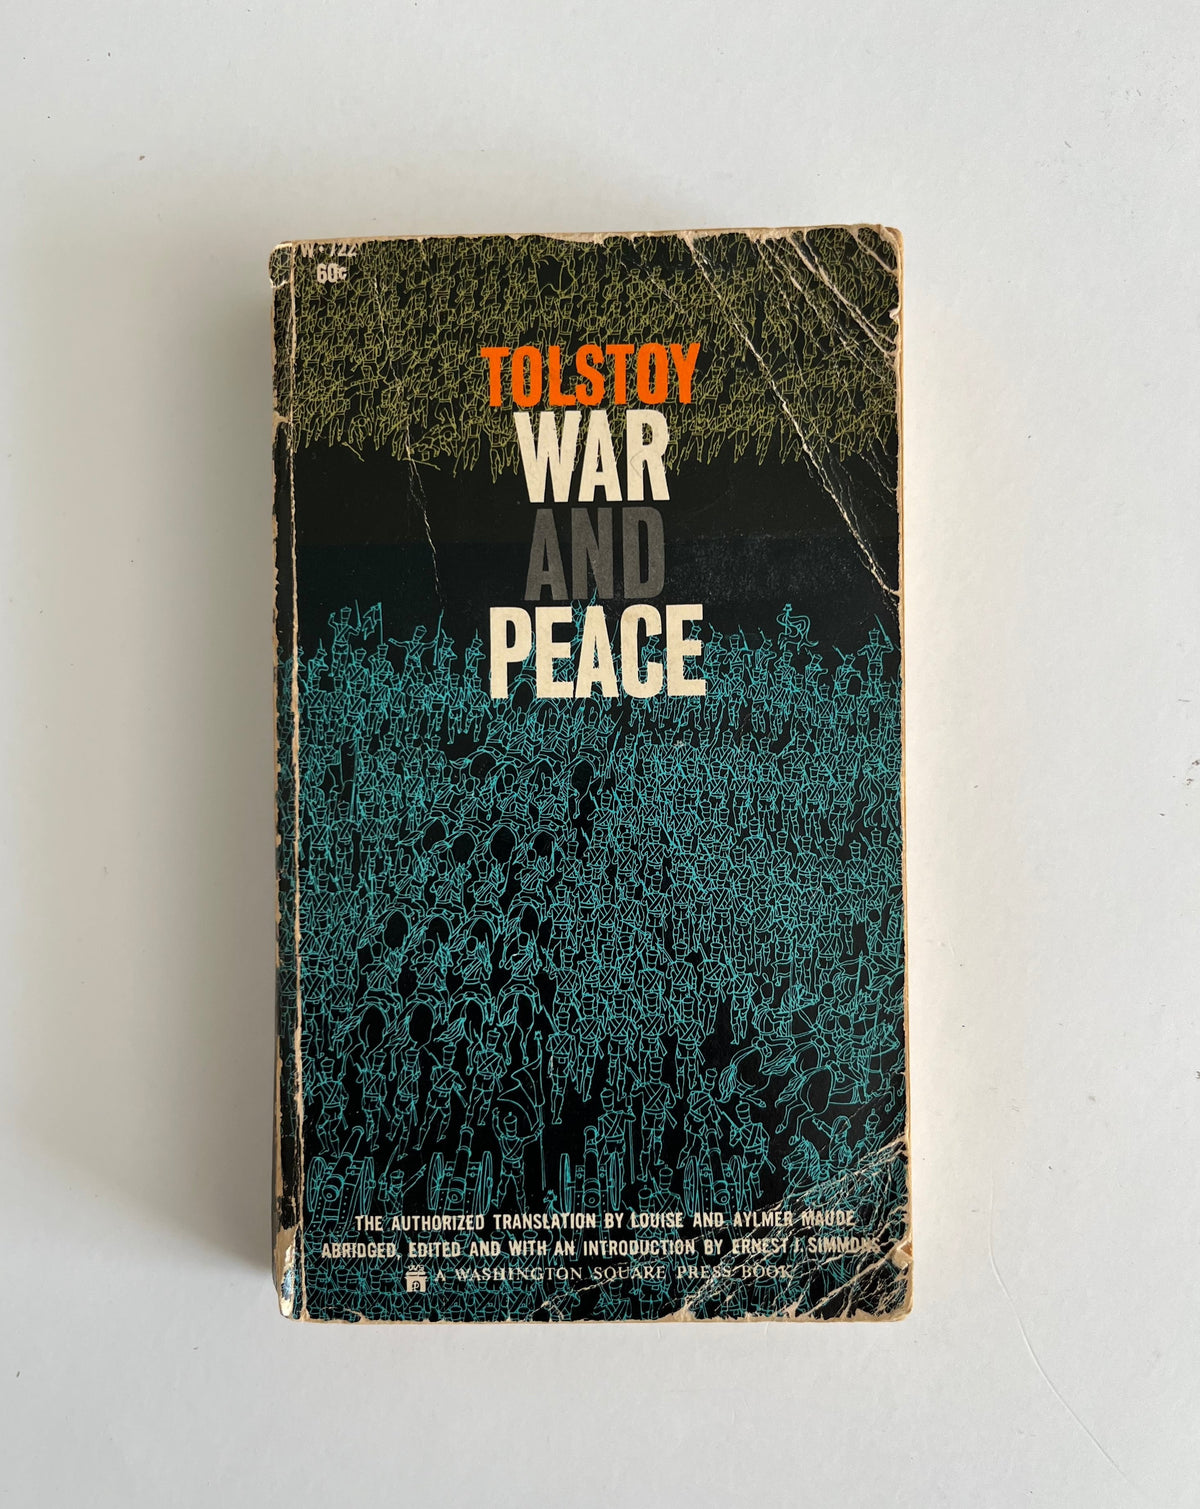 War and Peace by Tolstoy